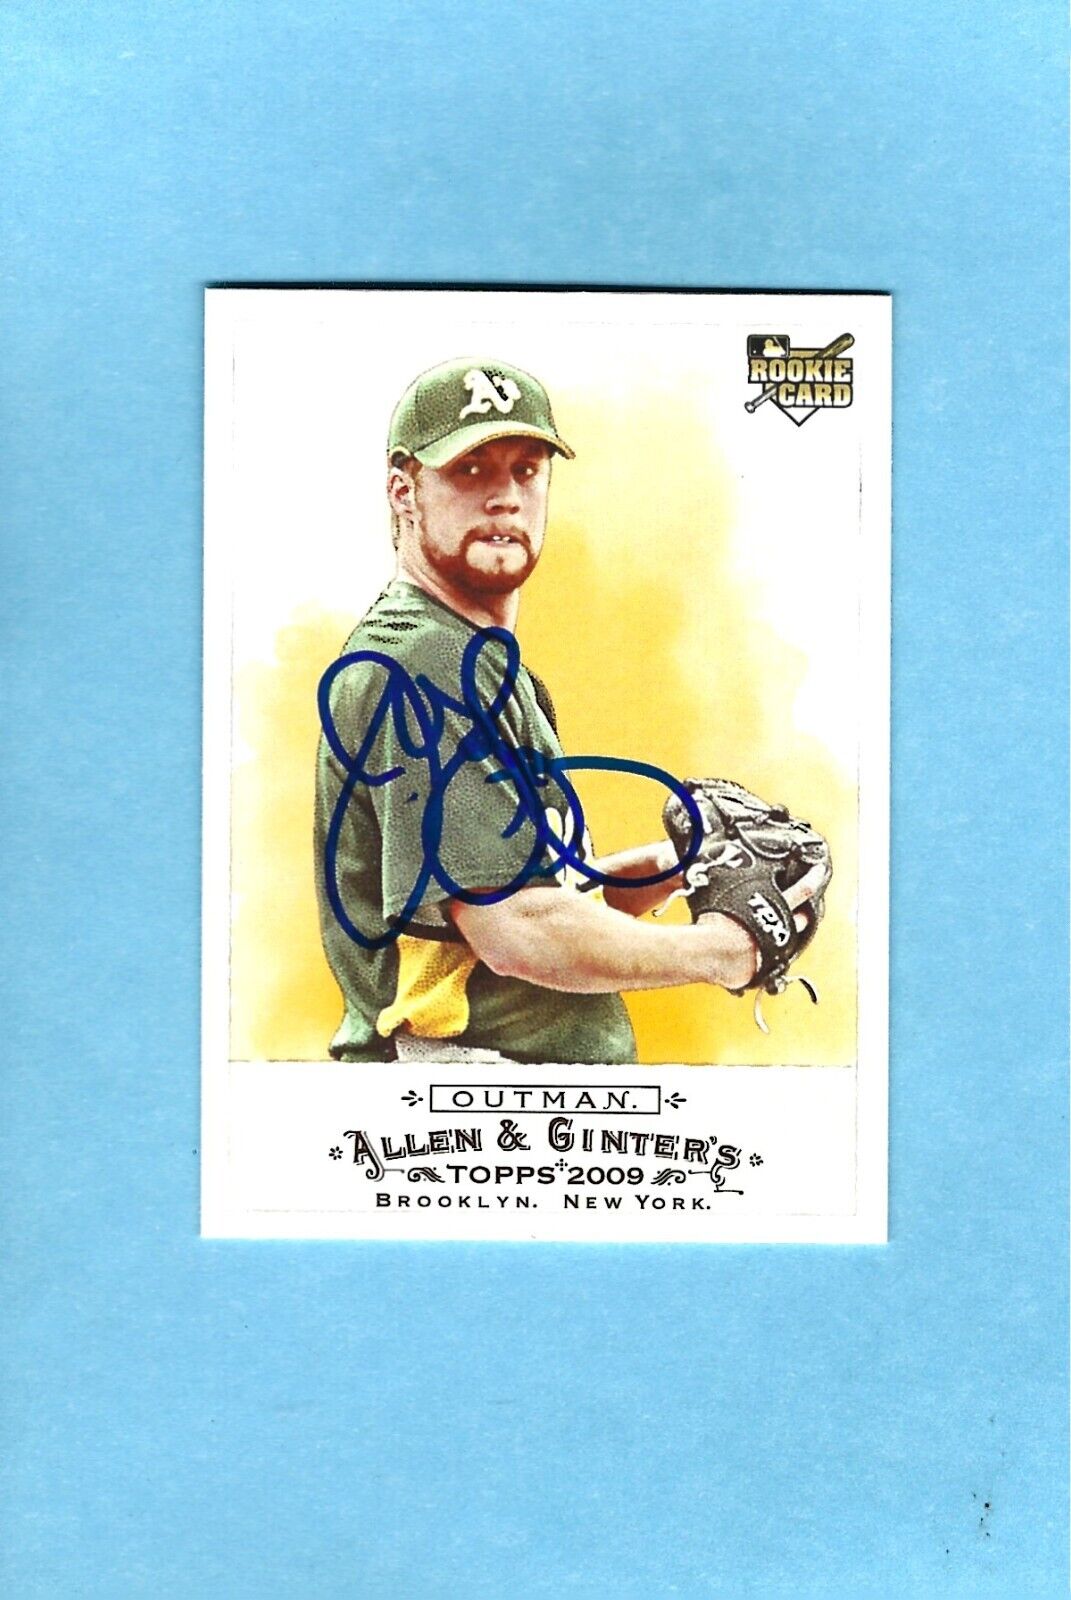 2009 Topps Allen Ginter Josh Outman RC Rookie Auto On Card Signed Autographed. rookie card picture